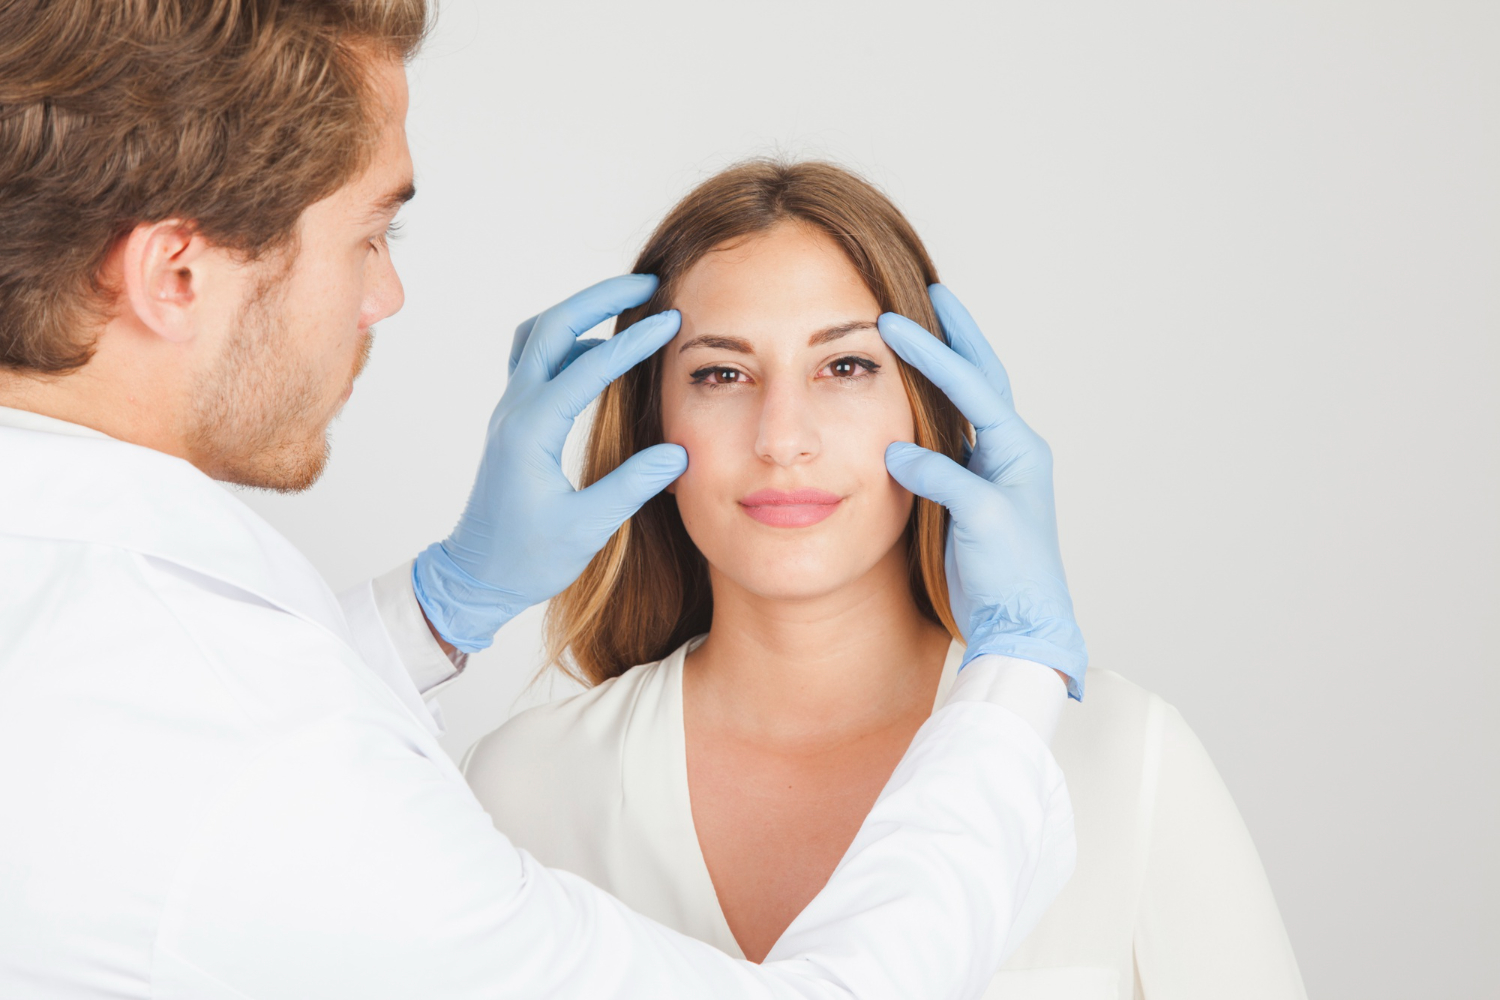 Brow Lift vs. Eyelid Surgery: Which One Suits You The Best?